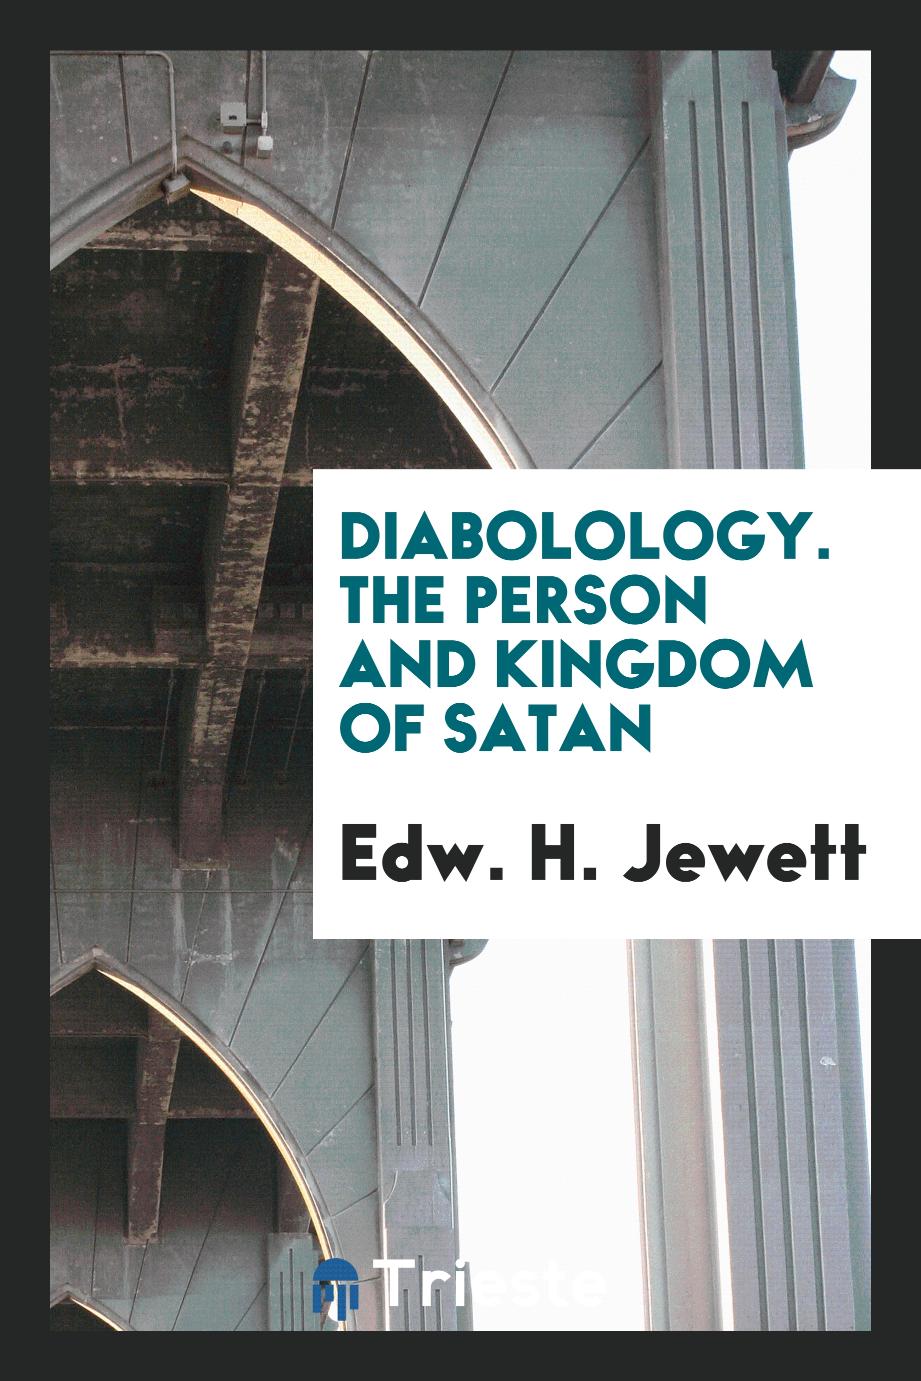 Diabolology. The person and kingdom of Satan